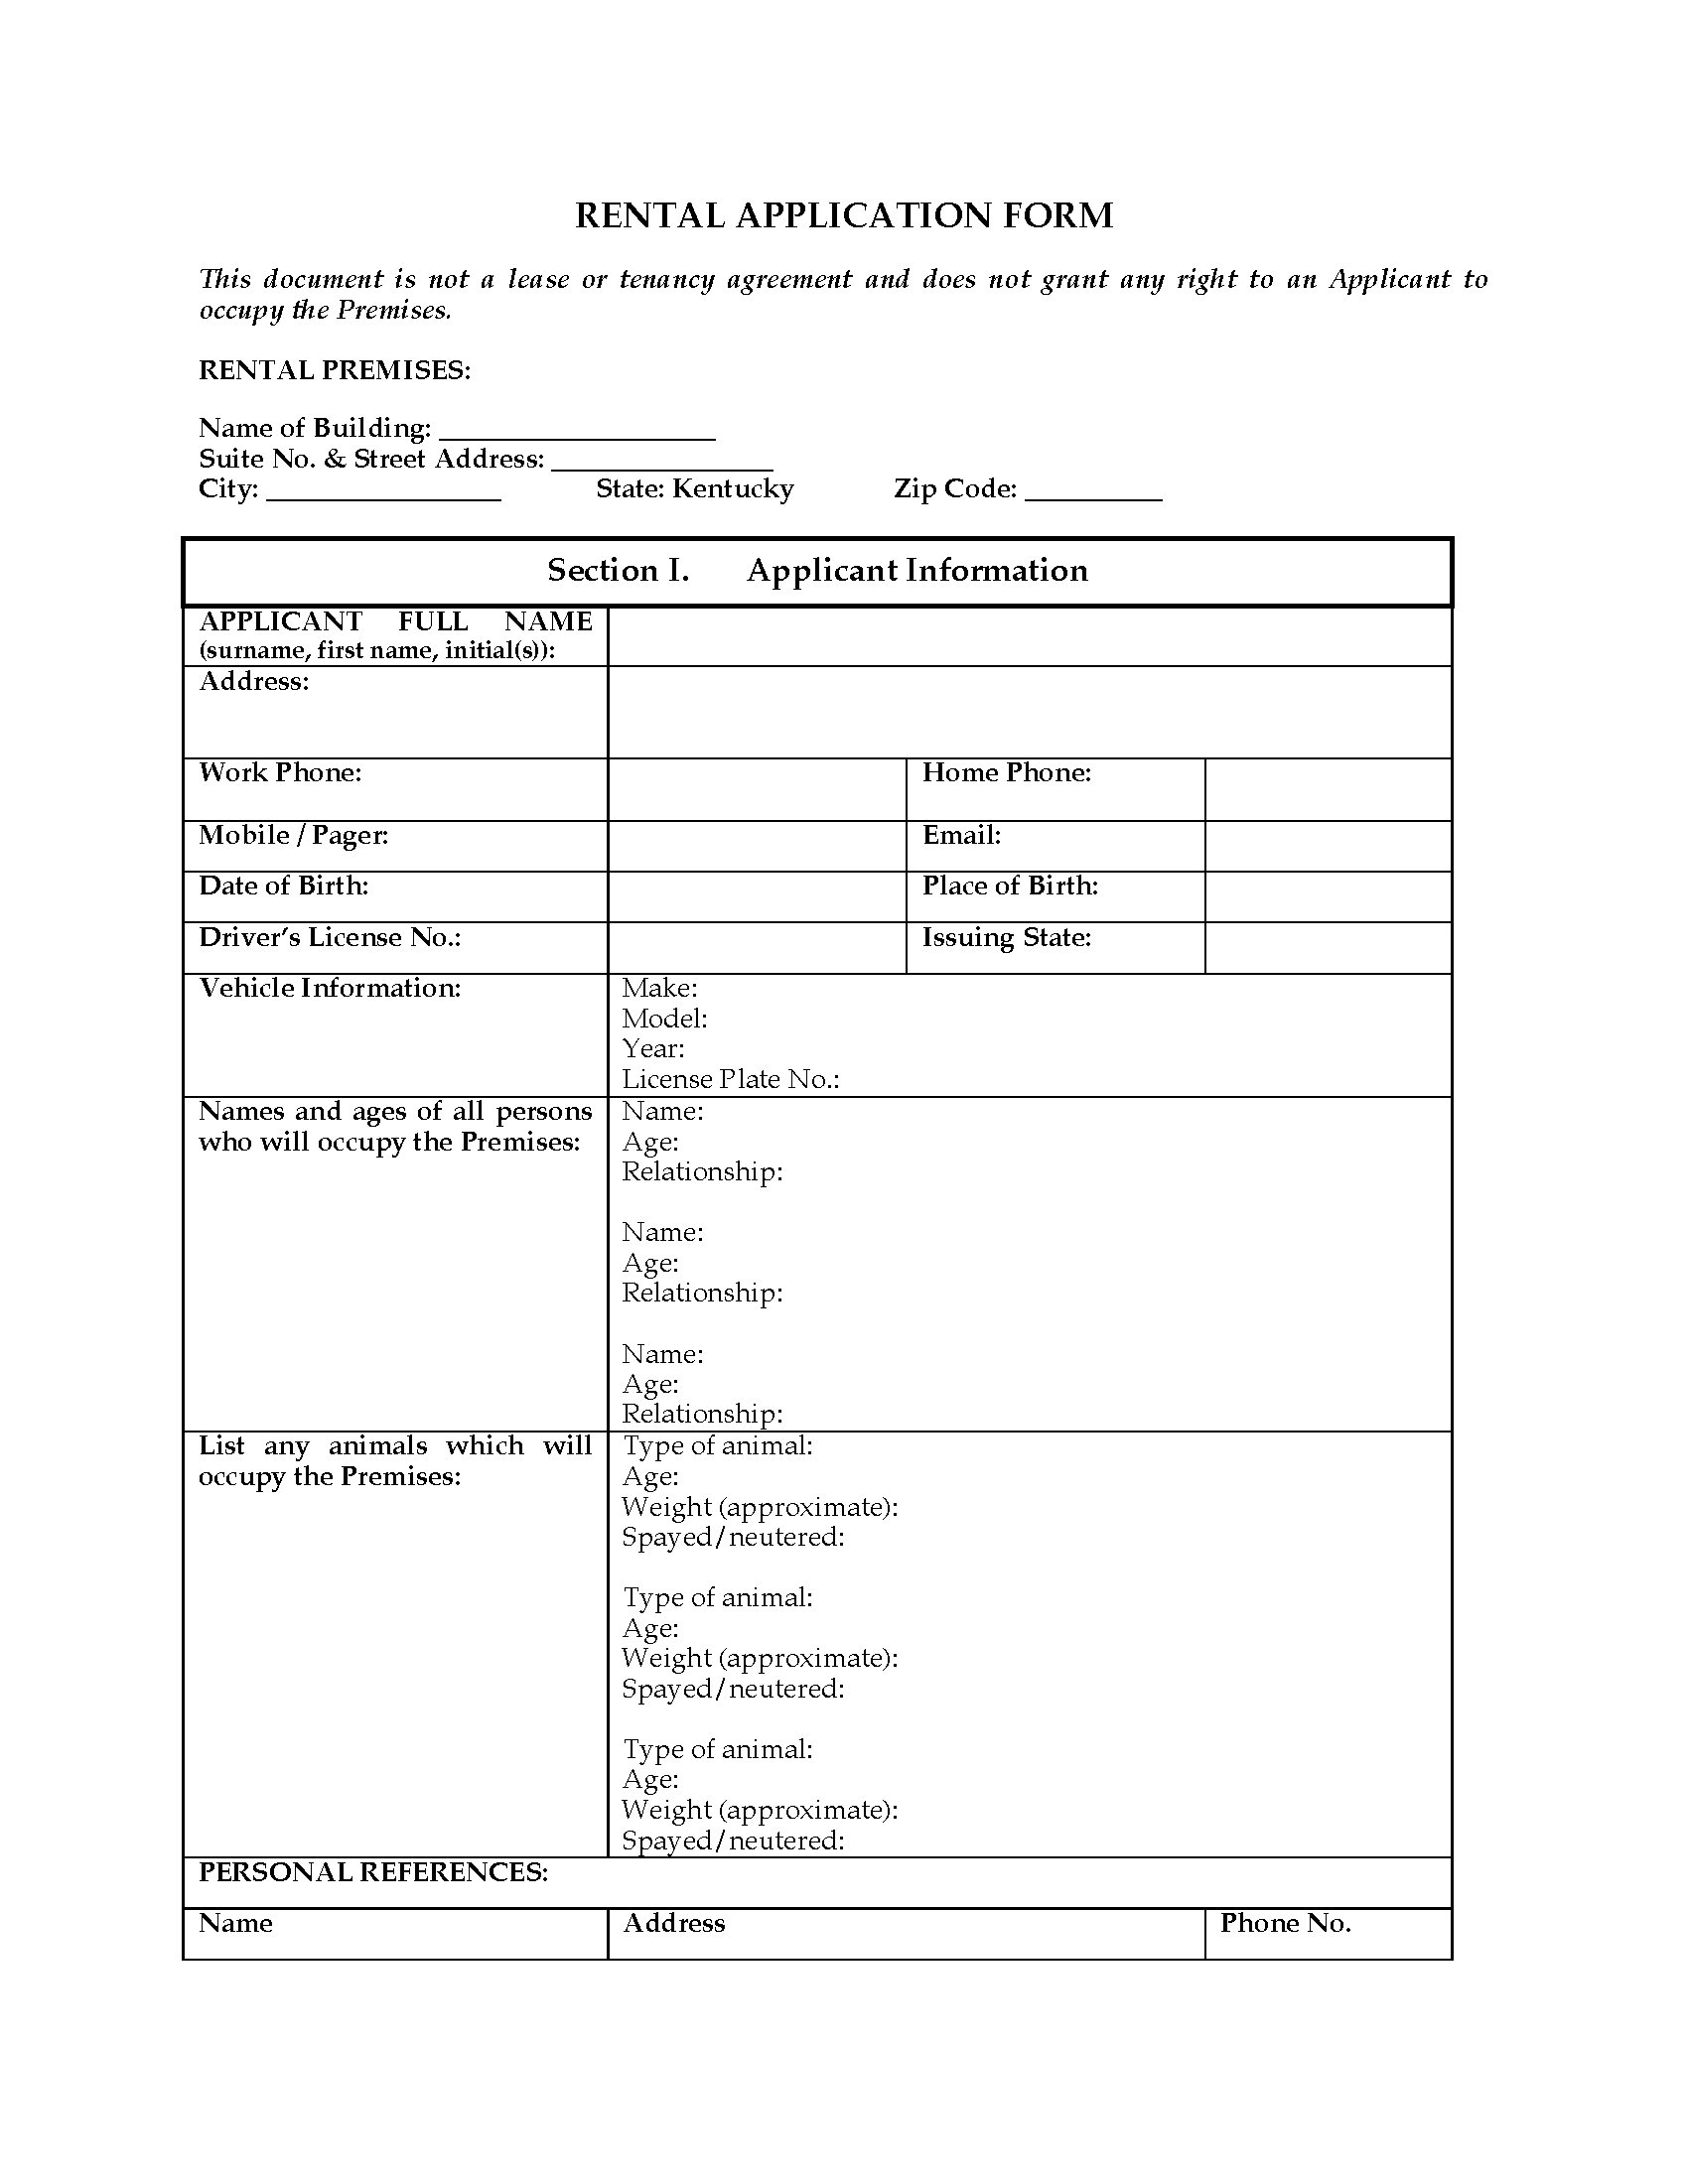 kentucky-rental-application-form-legal-forms-and-business-templates